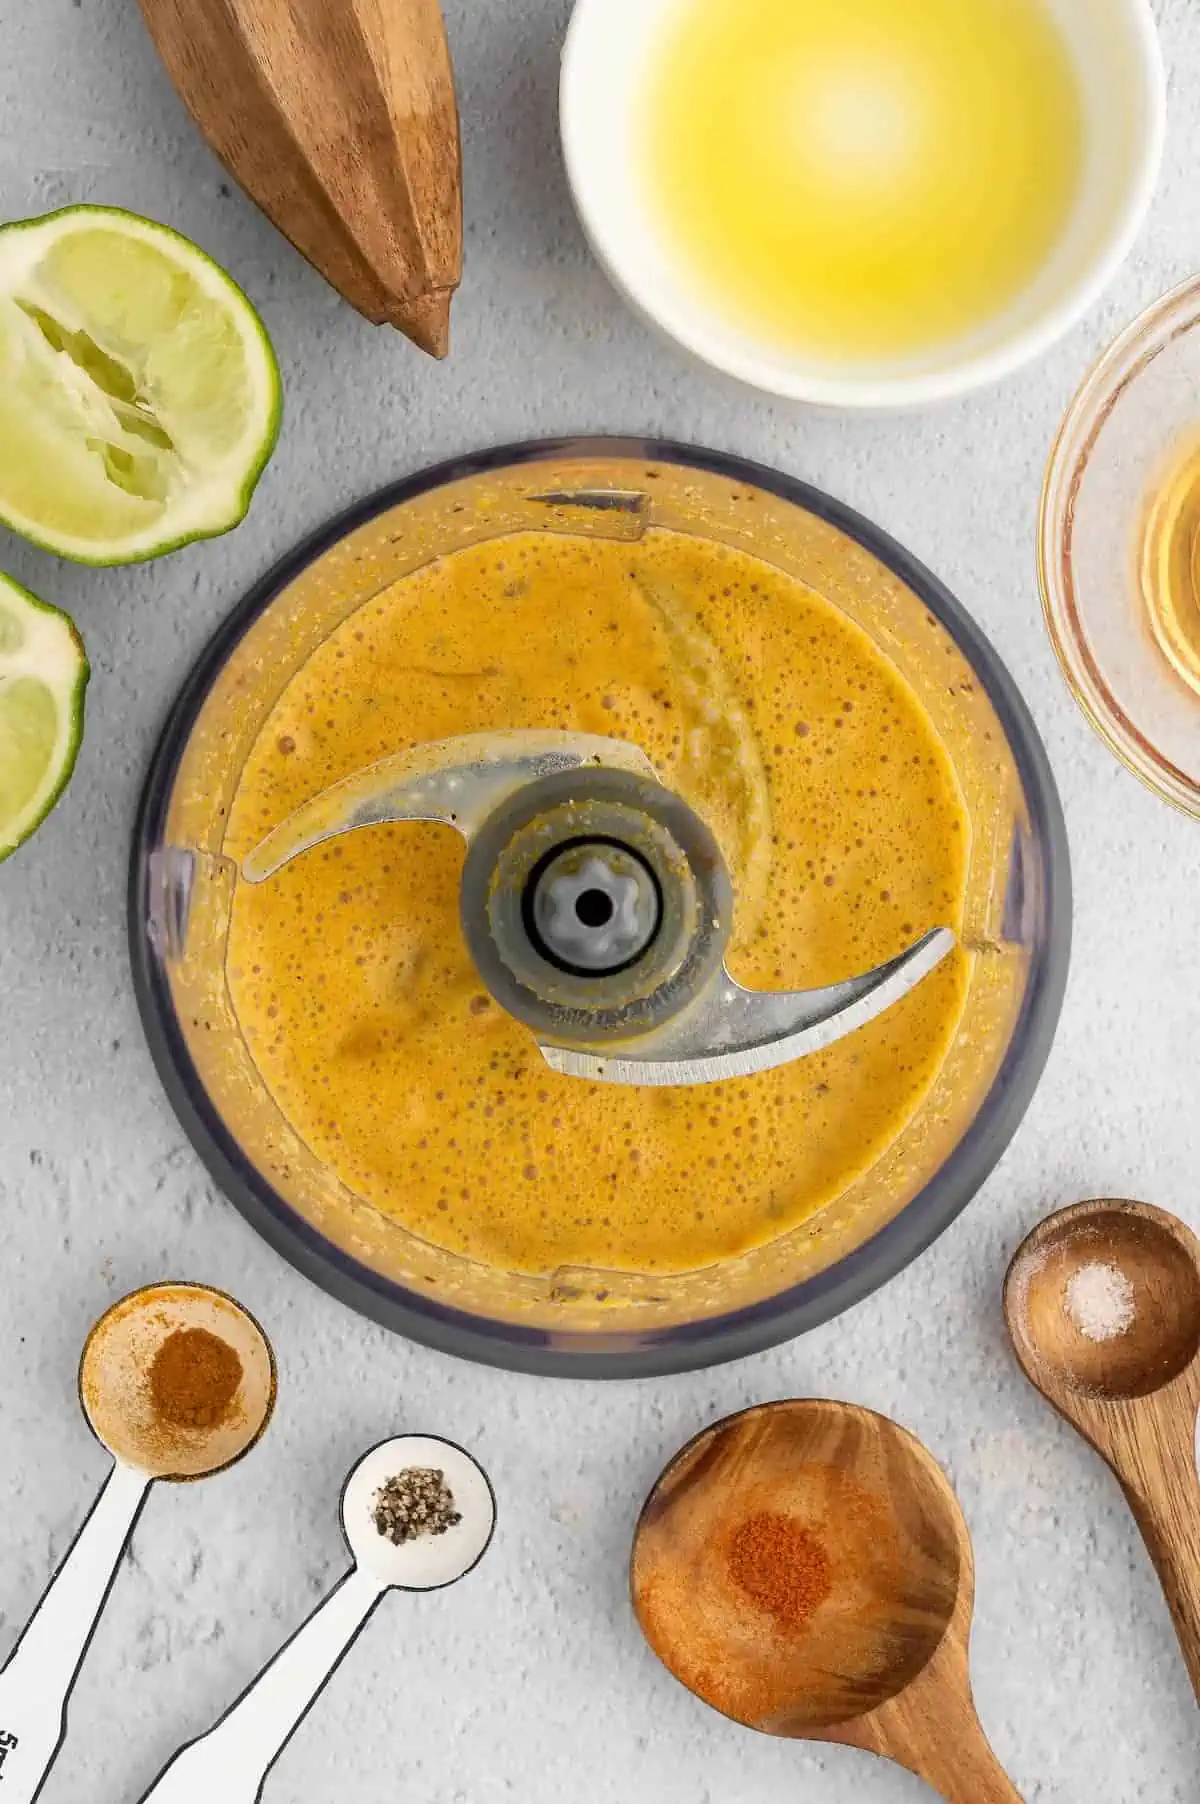 A citrus-turmeric dressing being prepped in a food processor.